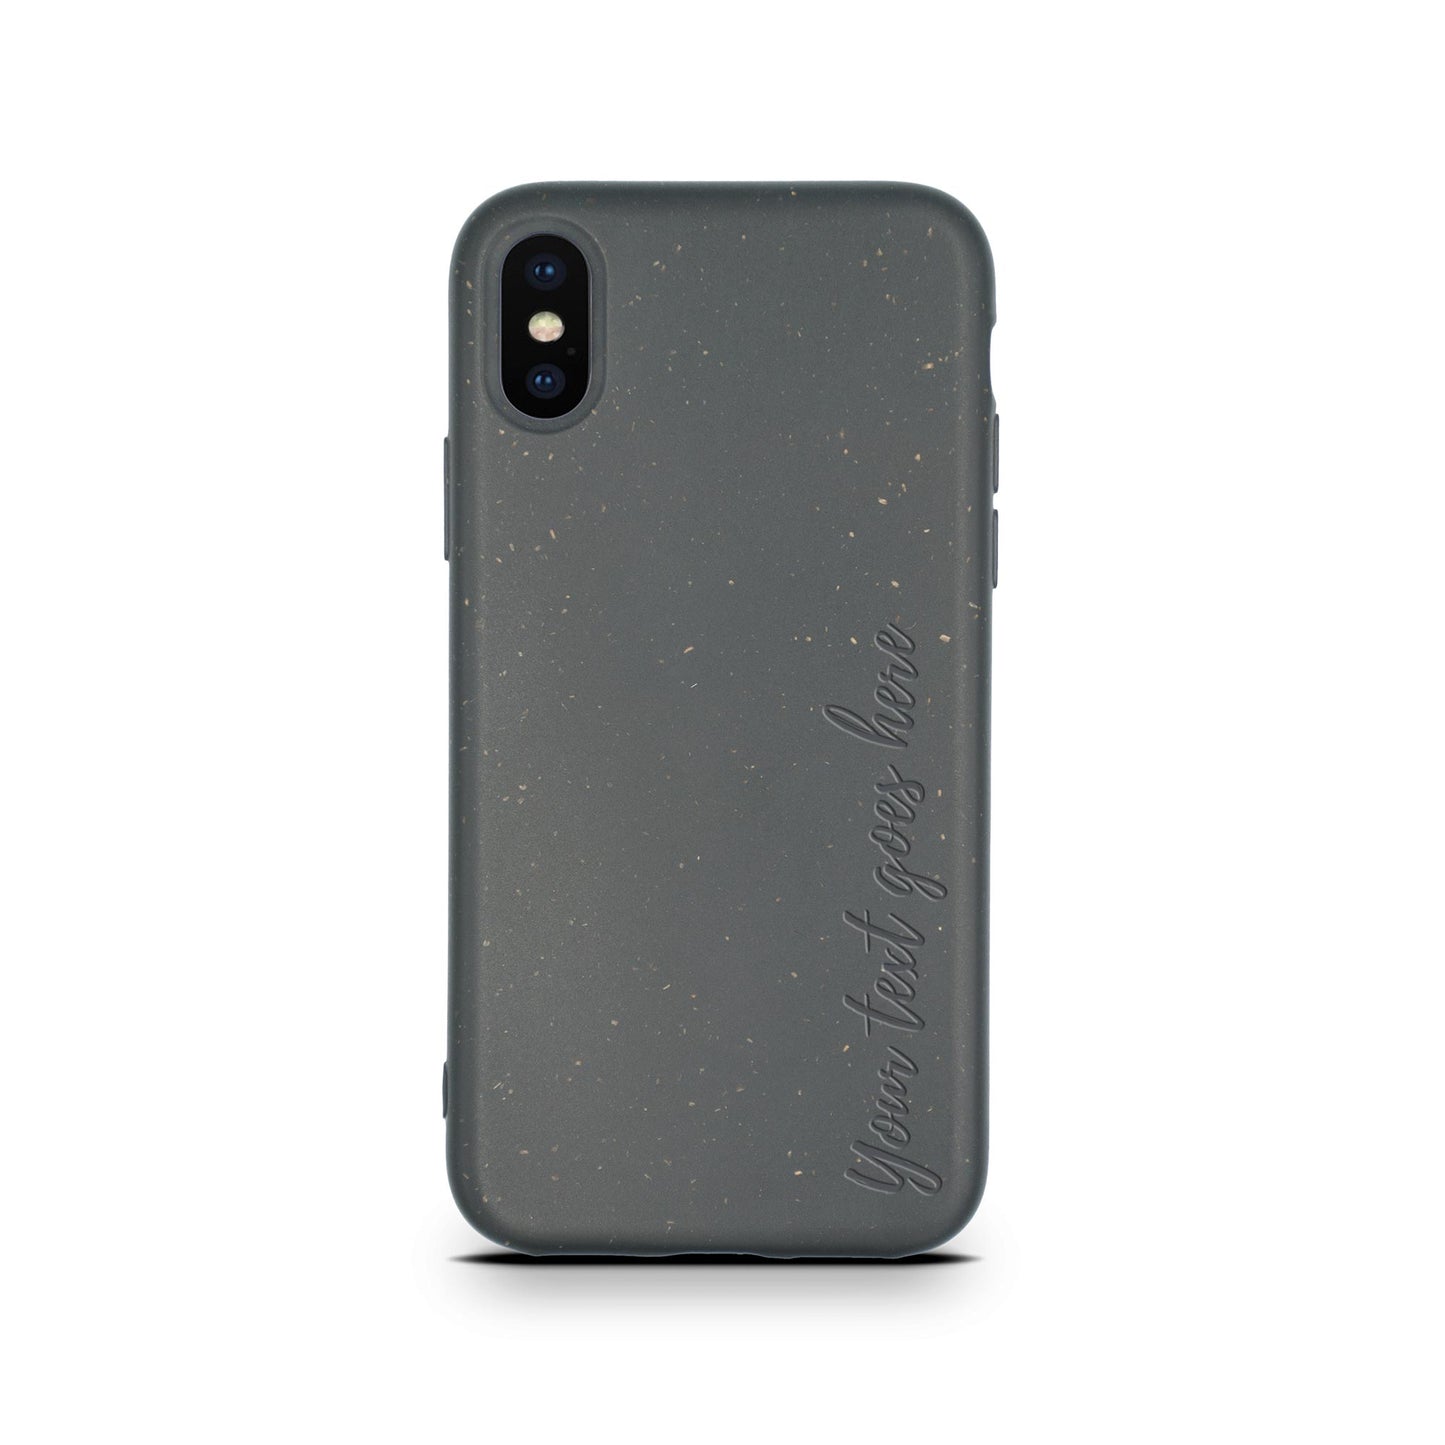 A black eco-friendly smartphone case with speckled design and the text "Your text goes here" on a white background - Biodegradable Personalized Iphone Case by Tan Lily.